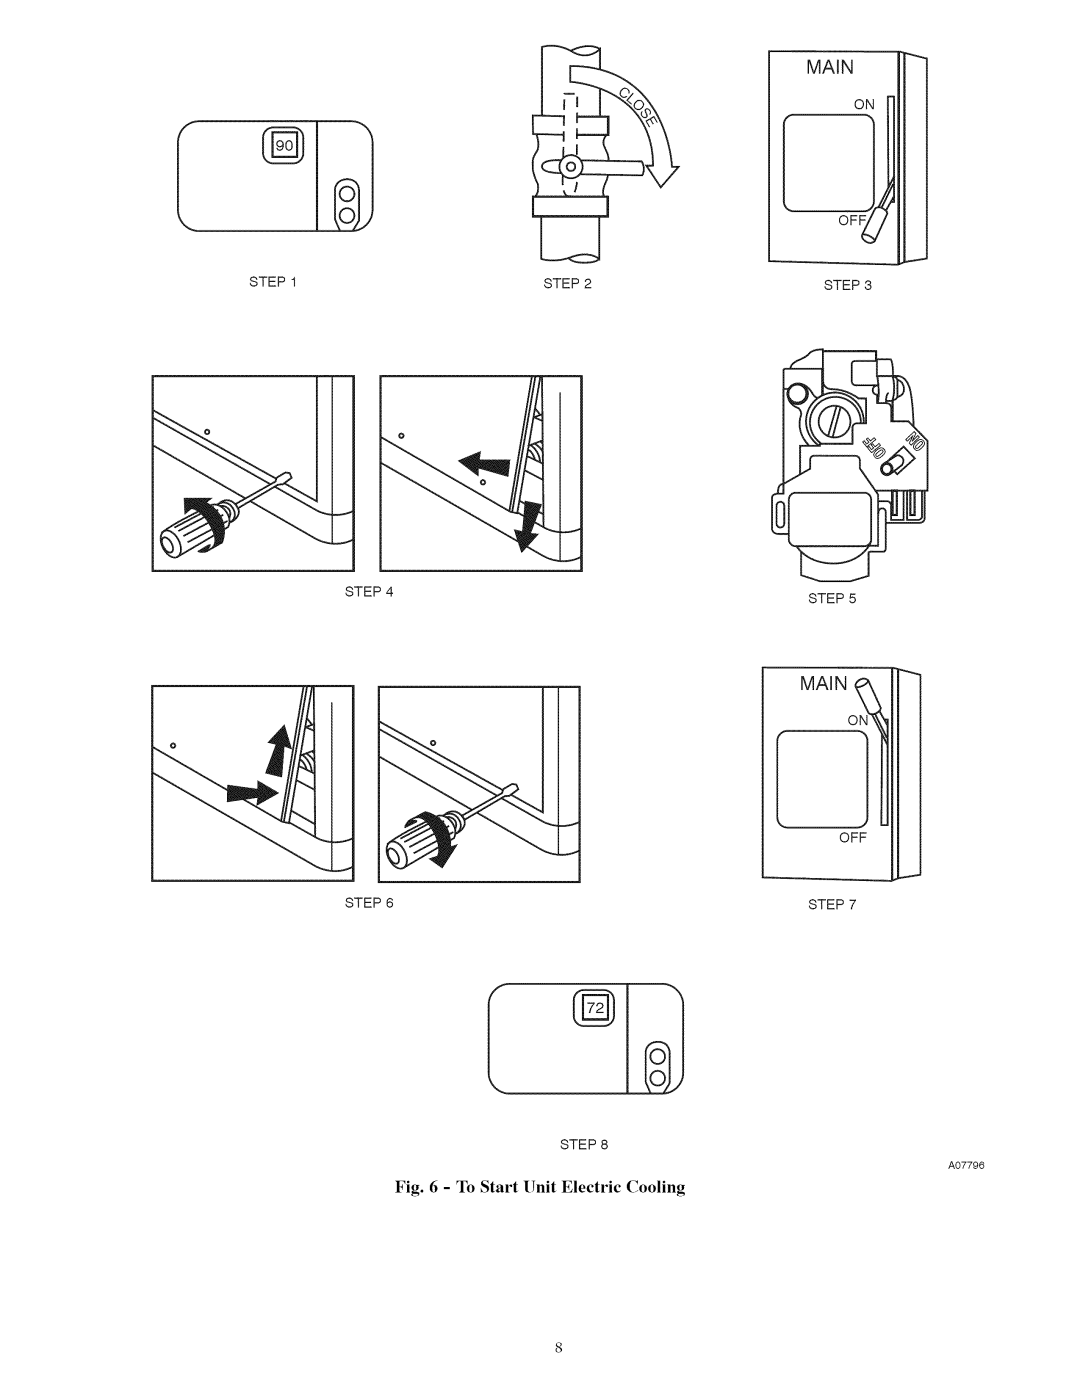 Carrier 48ES manual To Start Unit Electric Cooling, STEP2 STEP STEP, On Off, Step, A07796 